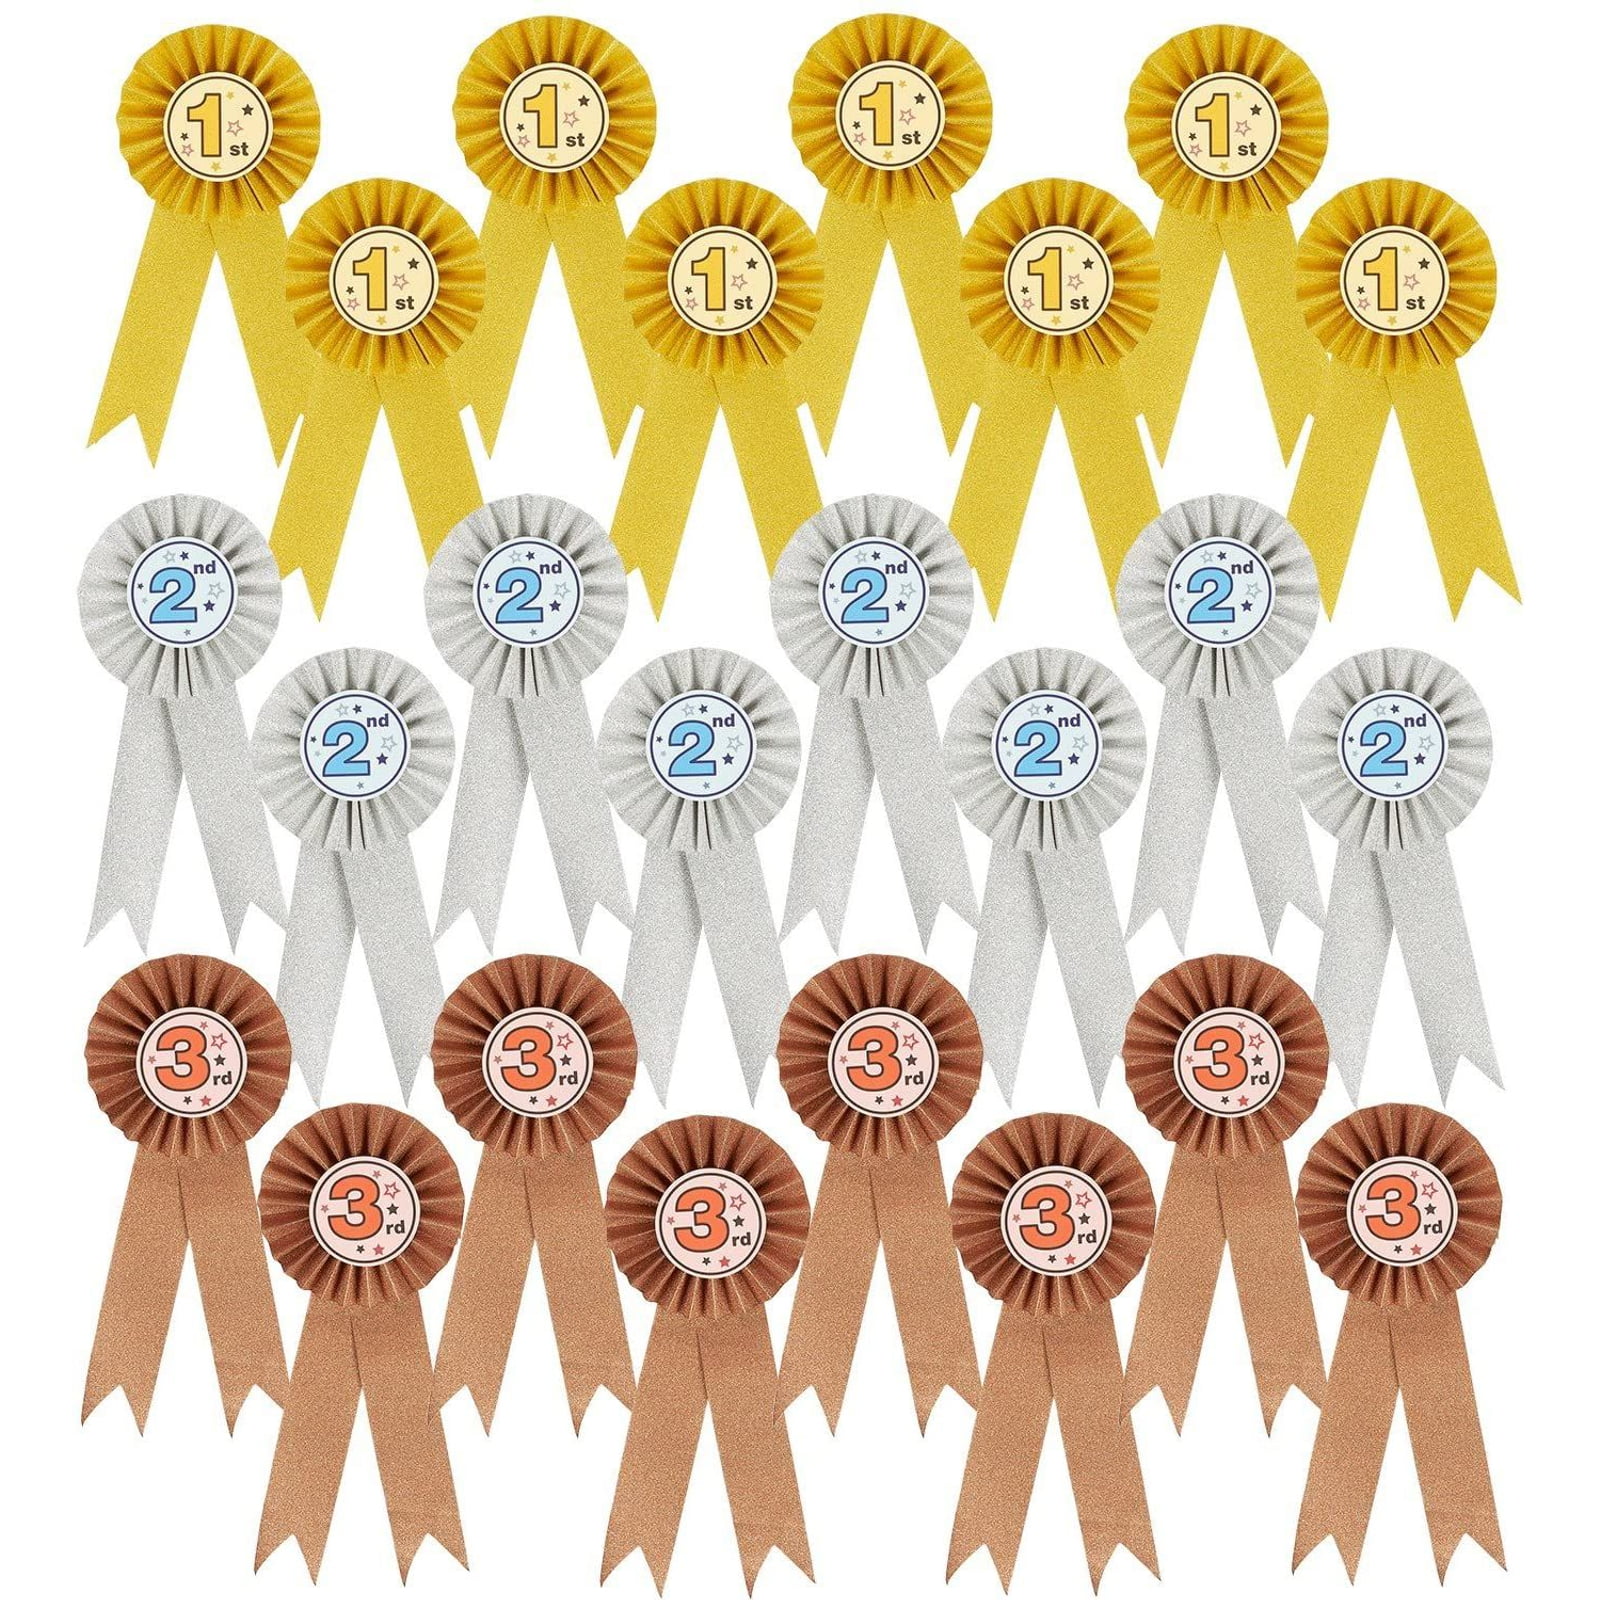 Show Rosettes 10 Sets 1st-4th Dog/Horse Show Event Schools Award FREE POSTAGE